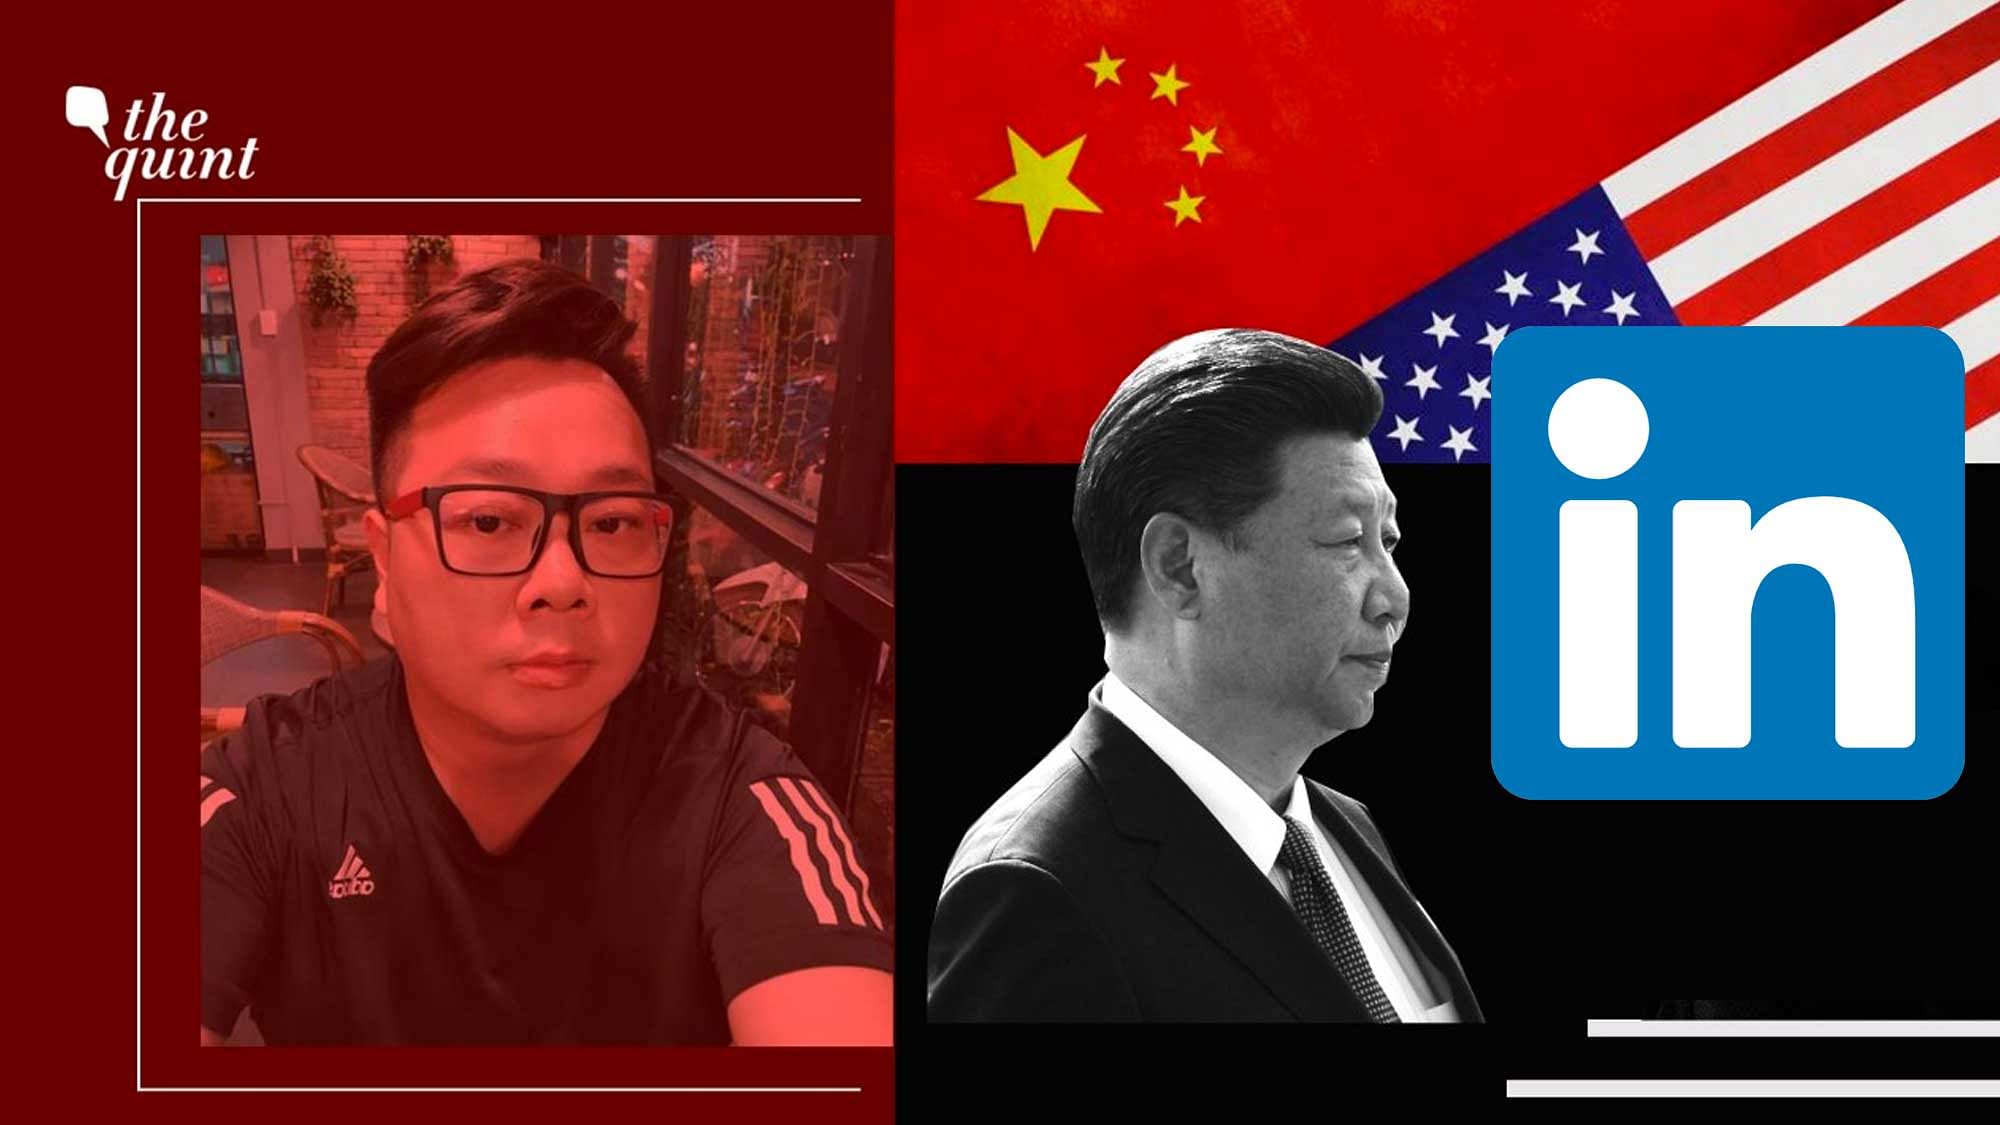 The US Justice Department said Jun Wei You was recruited by the Chinese government to get information from the United States around 2015 while he was a PhD candidate in Singapore.&nbsp;